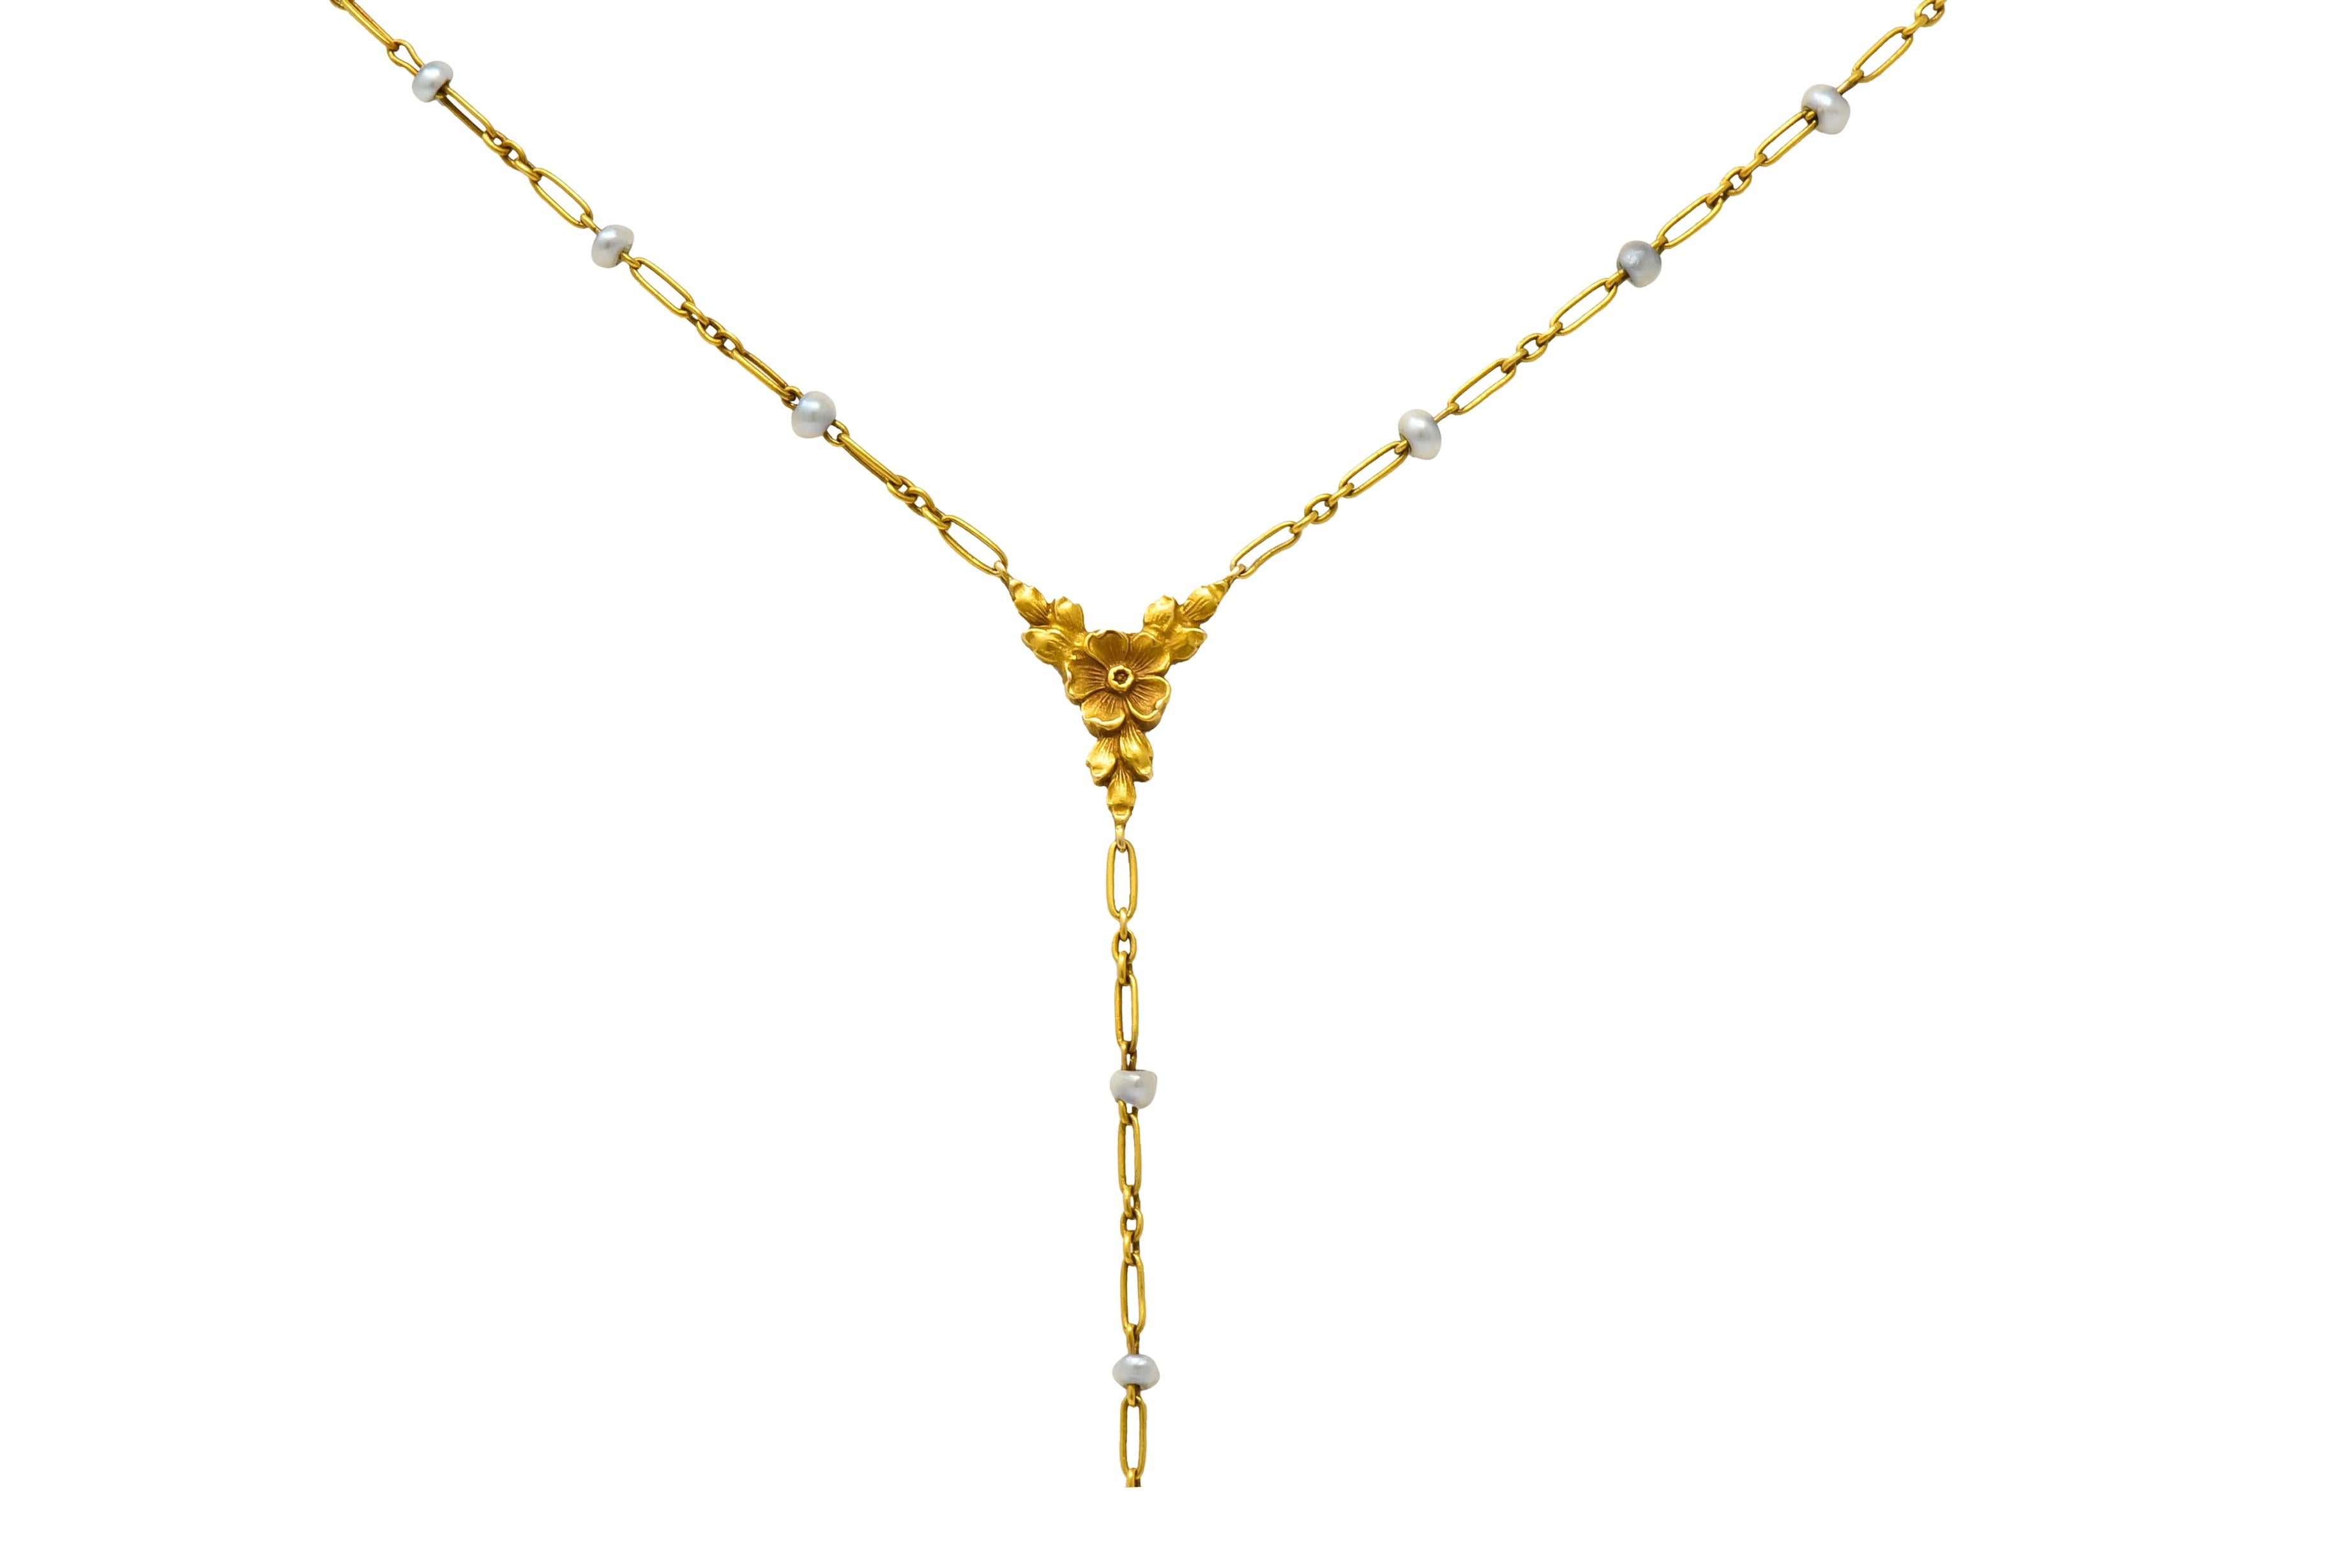 Women's or Men's Victorian Seed Pearl 14 Karat Gold Floral Lariat Necklace, circa 1900